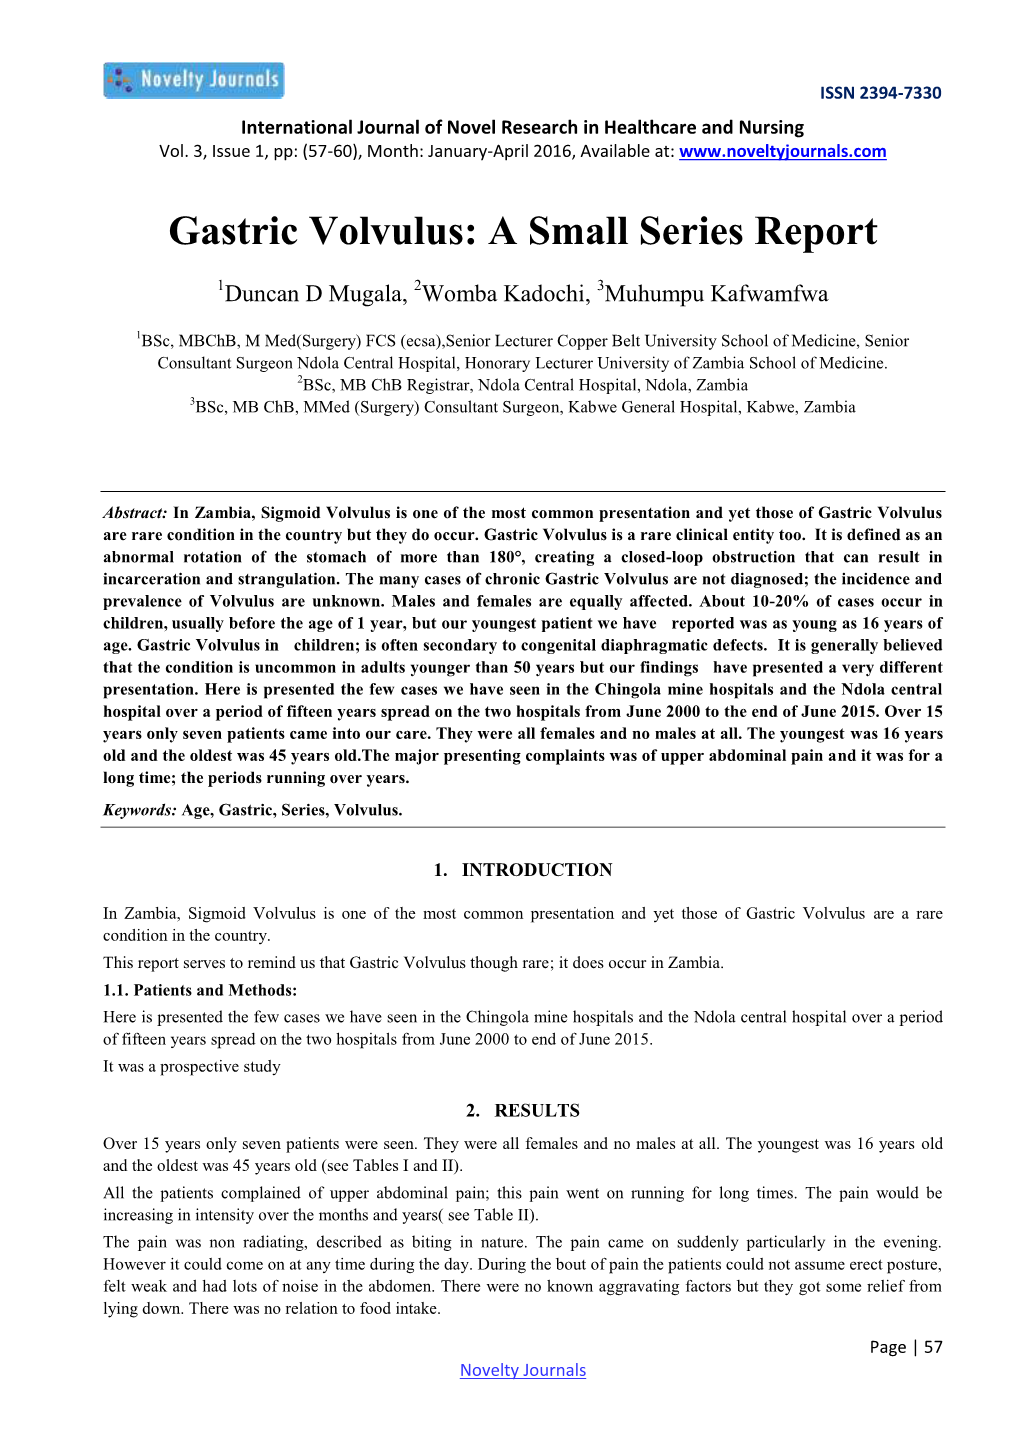 Gastric Volvulus: a Small Series Report